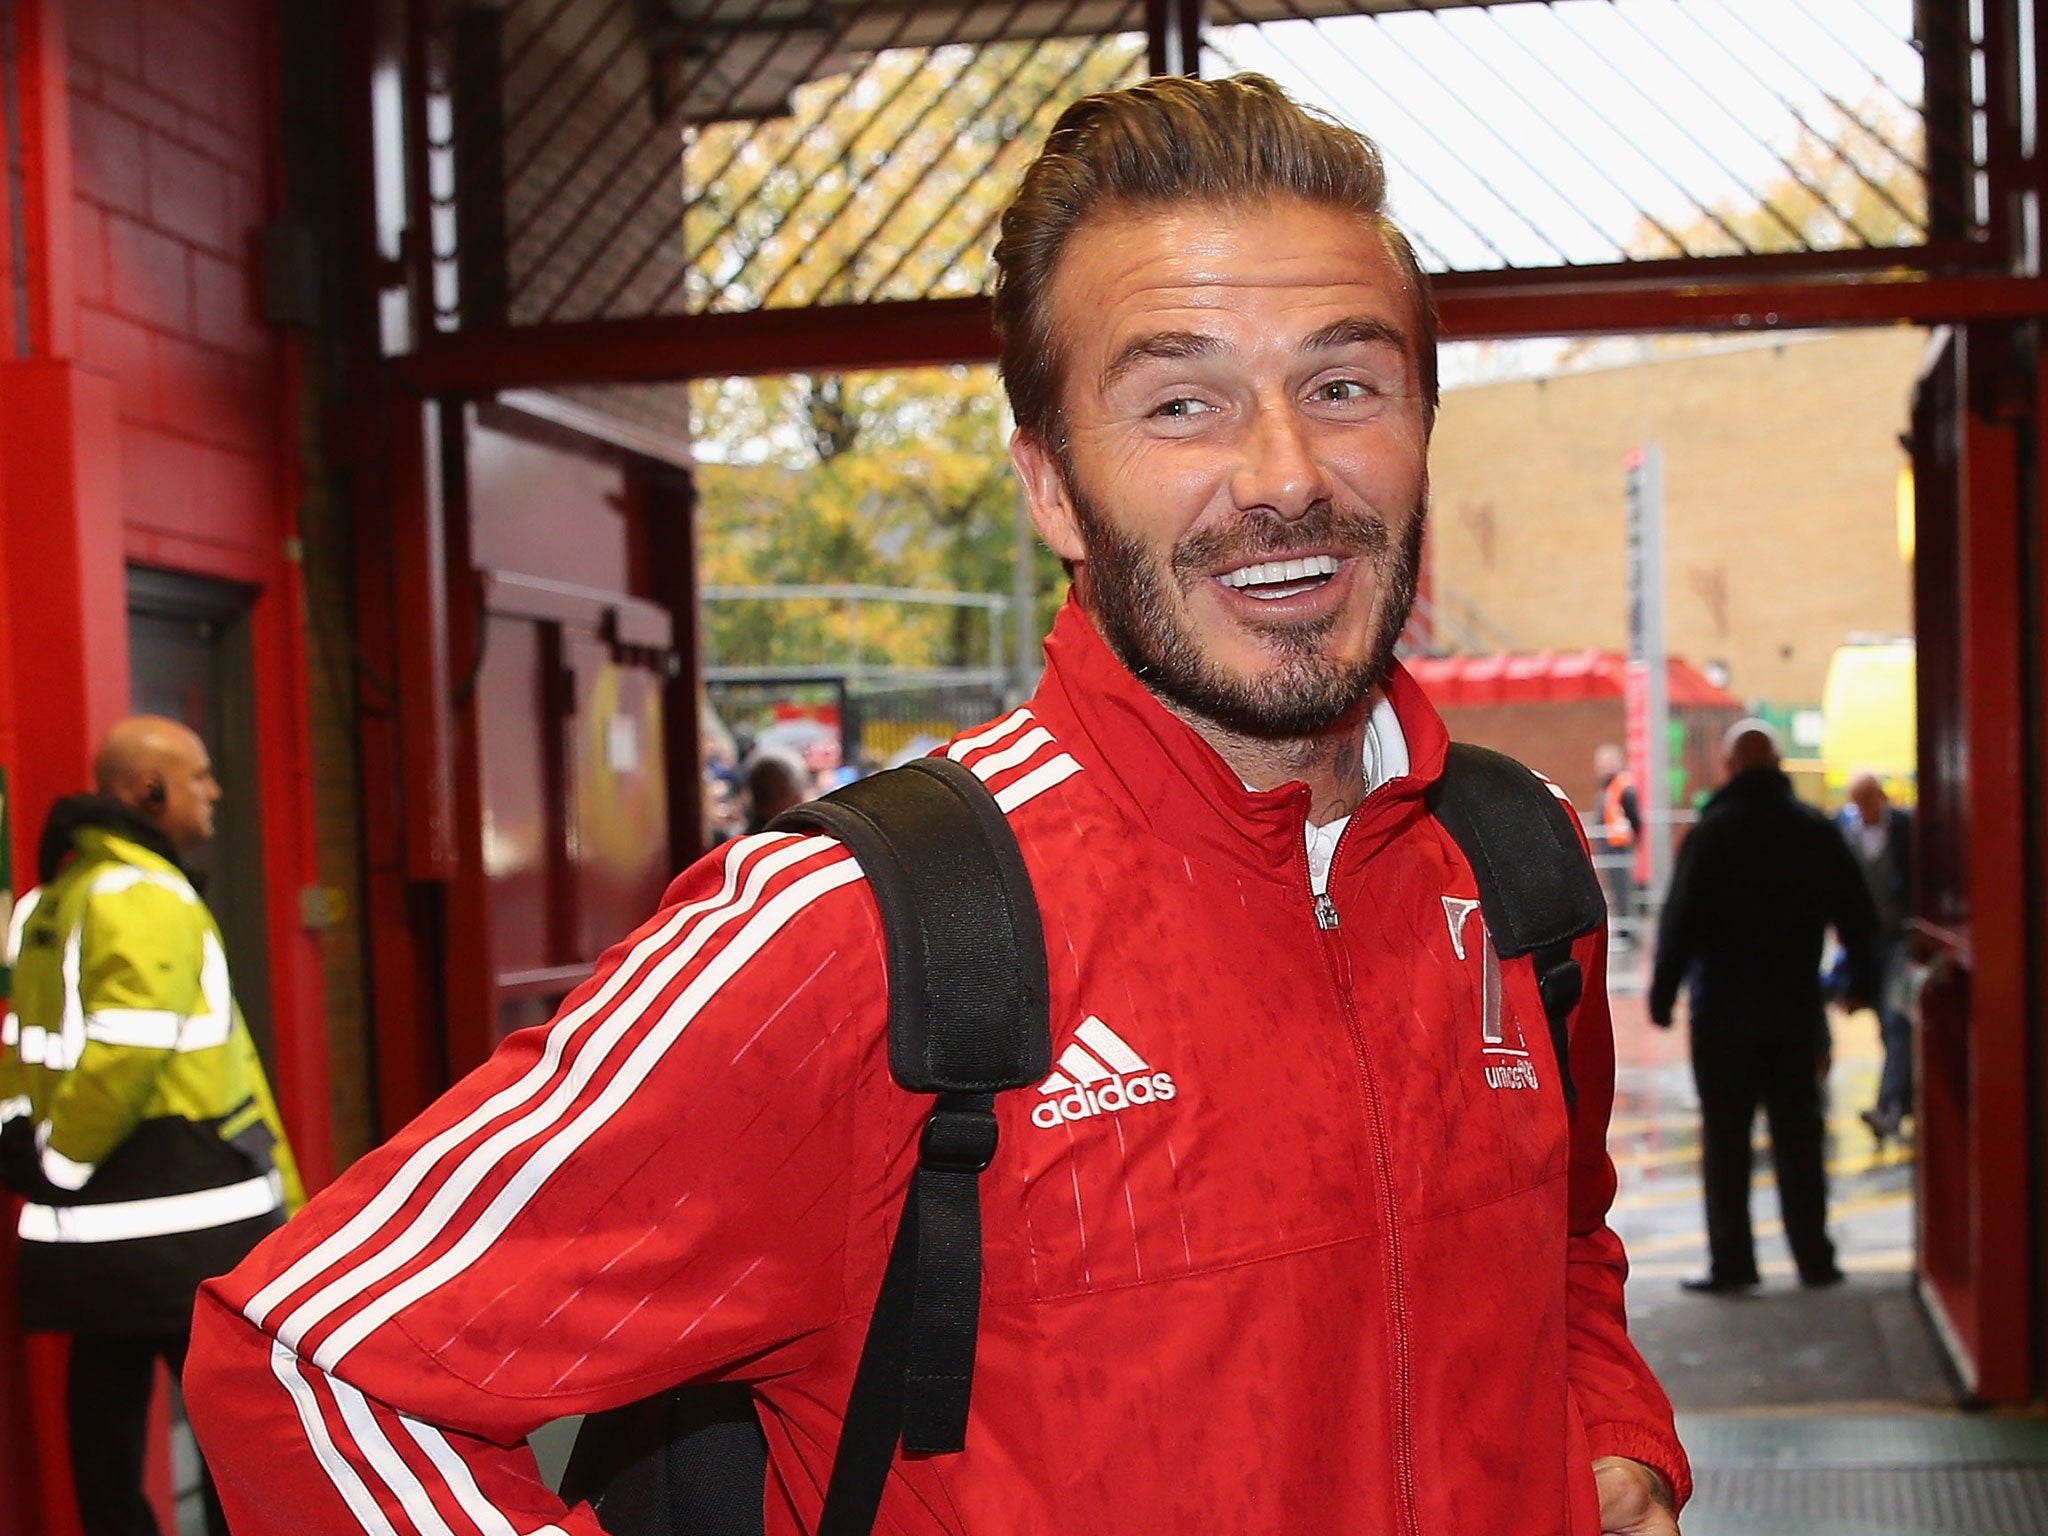 David Beckham at Old Trafford for the UNICEF charity match